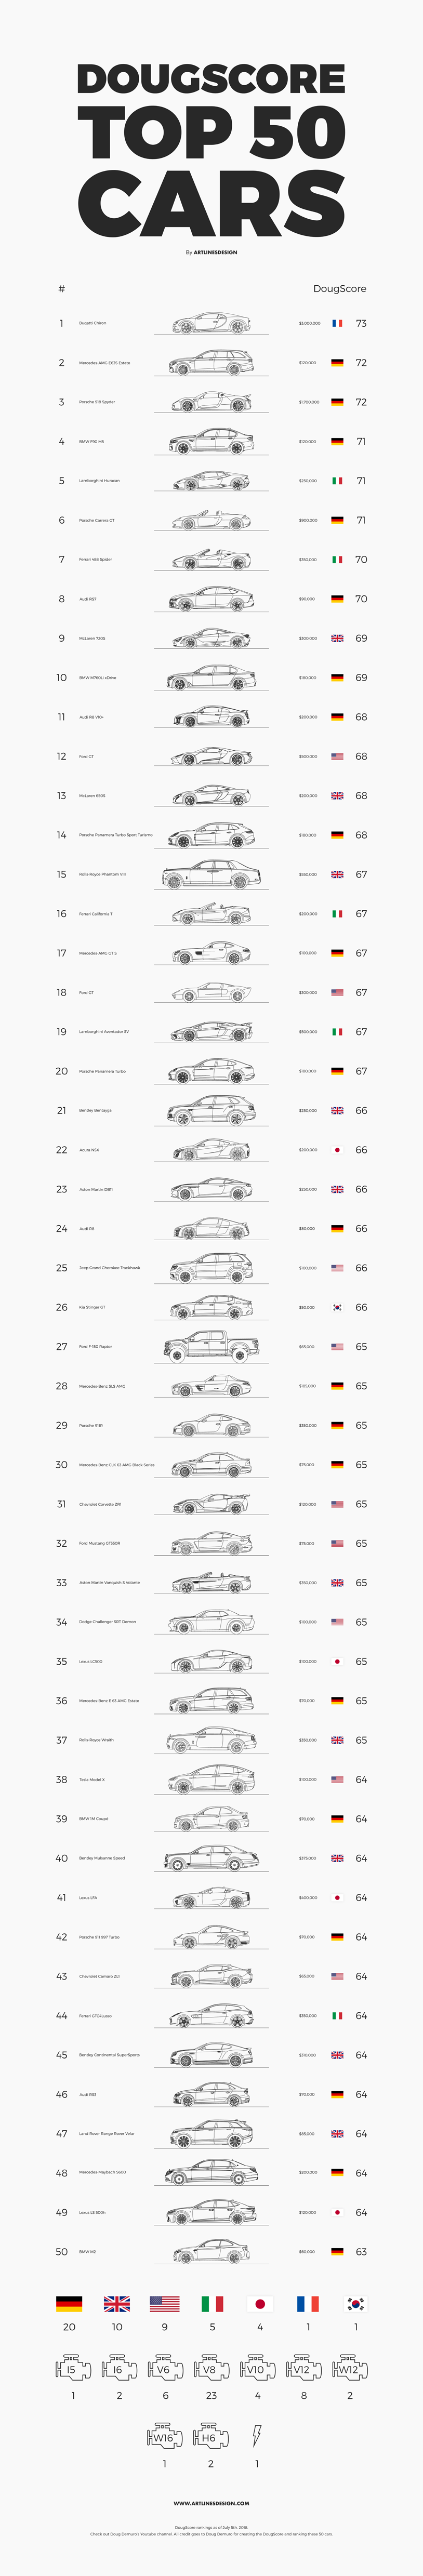 DougScore Top 50 Cars Infographic